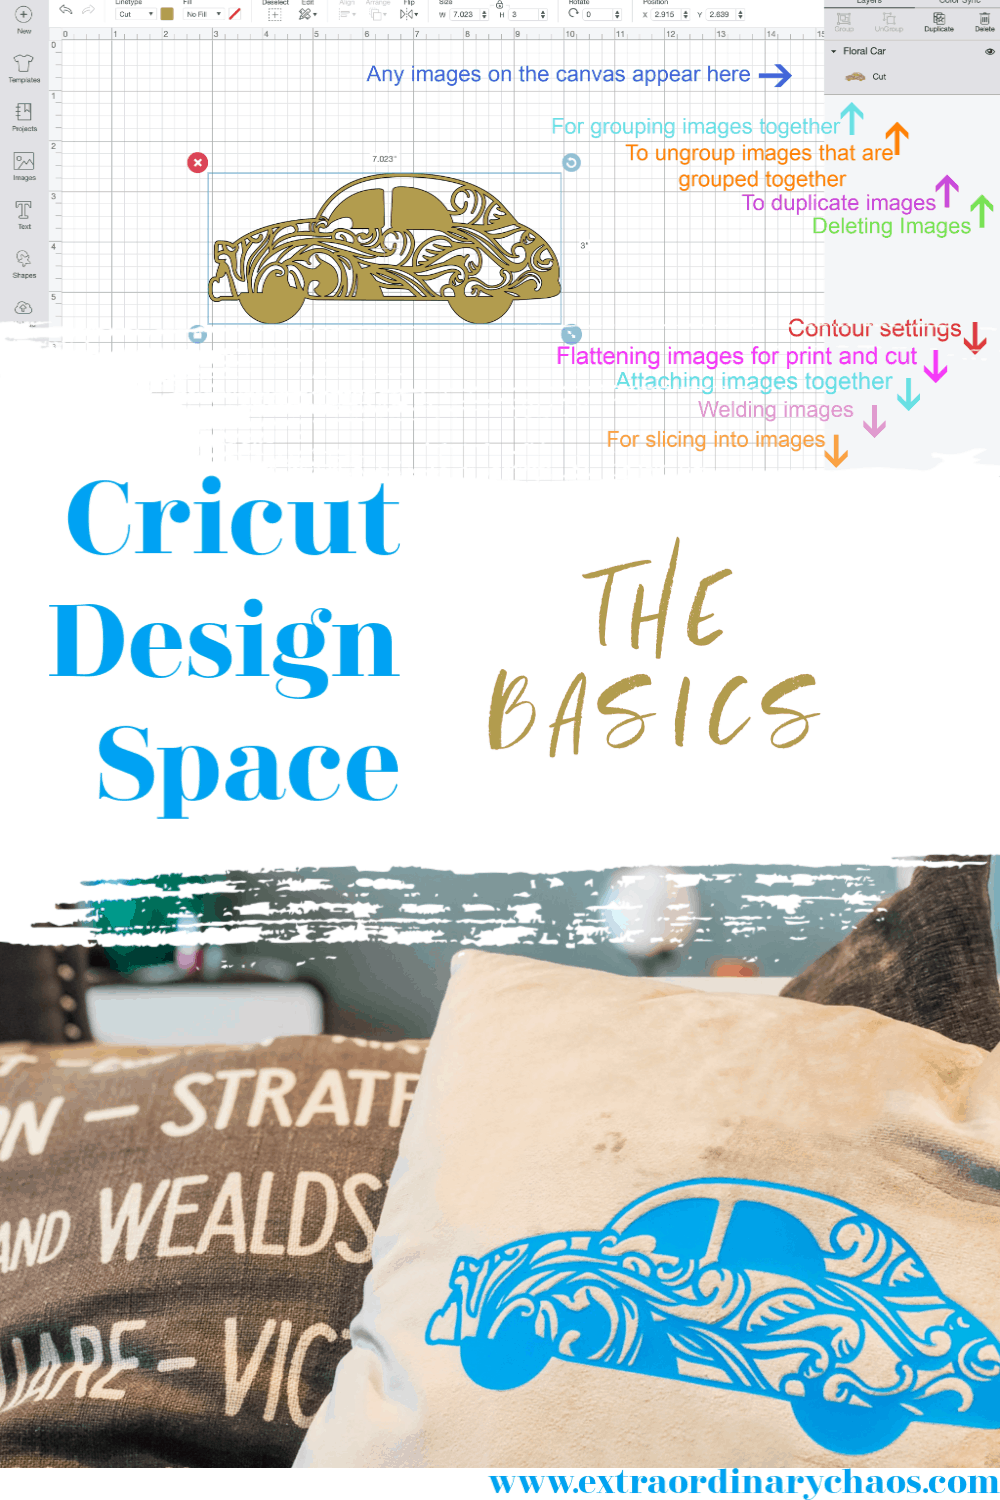 Cricut Design Space The Basics, How to use the Design Space Dashboard for Beginners